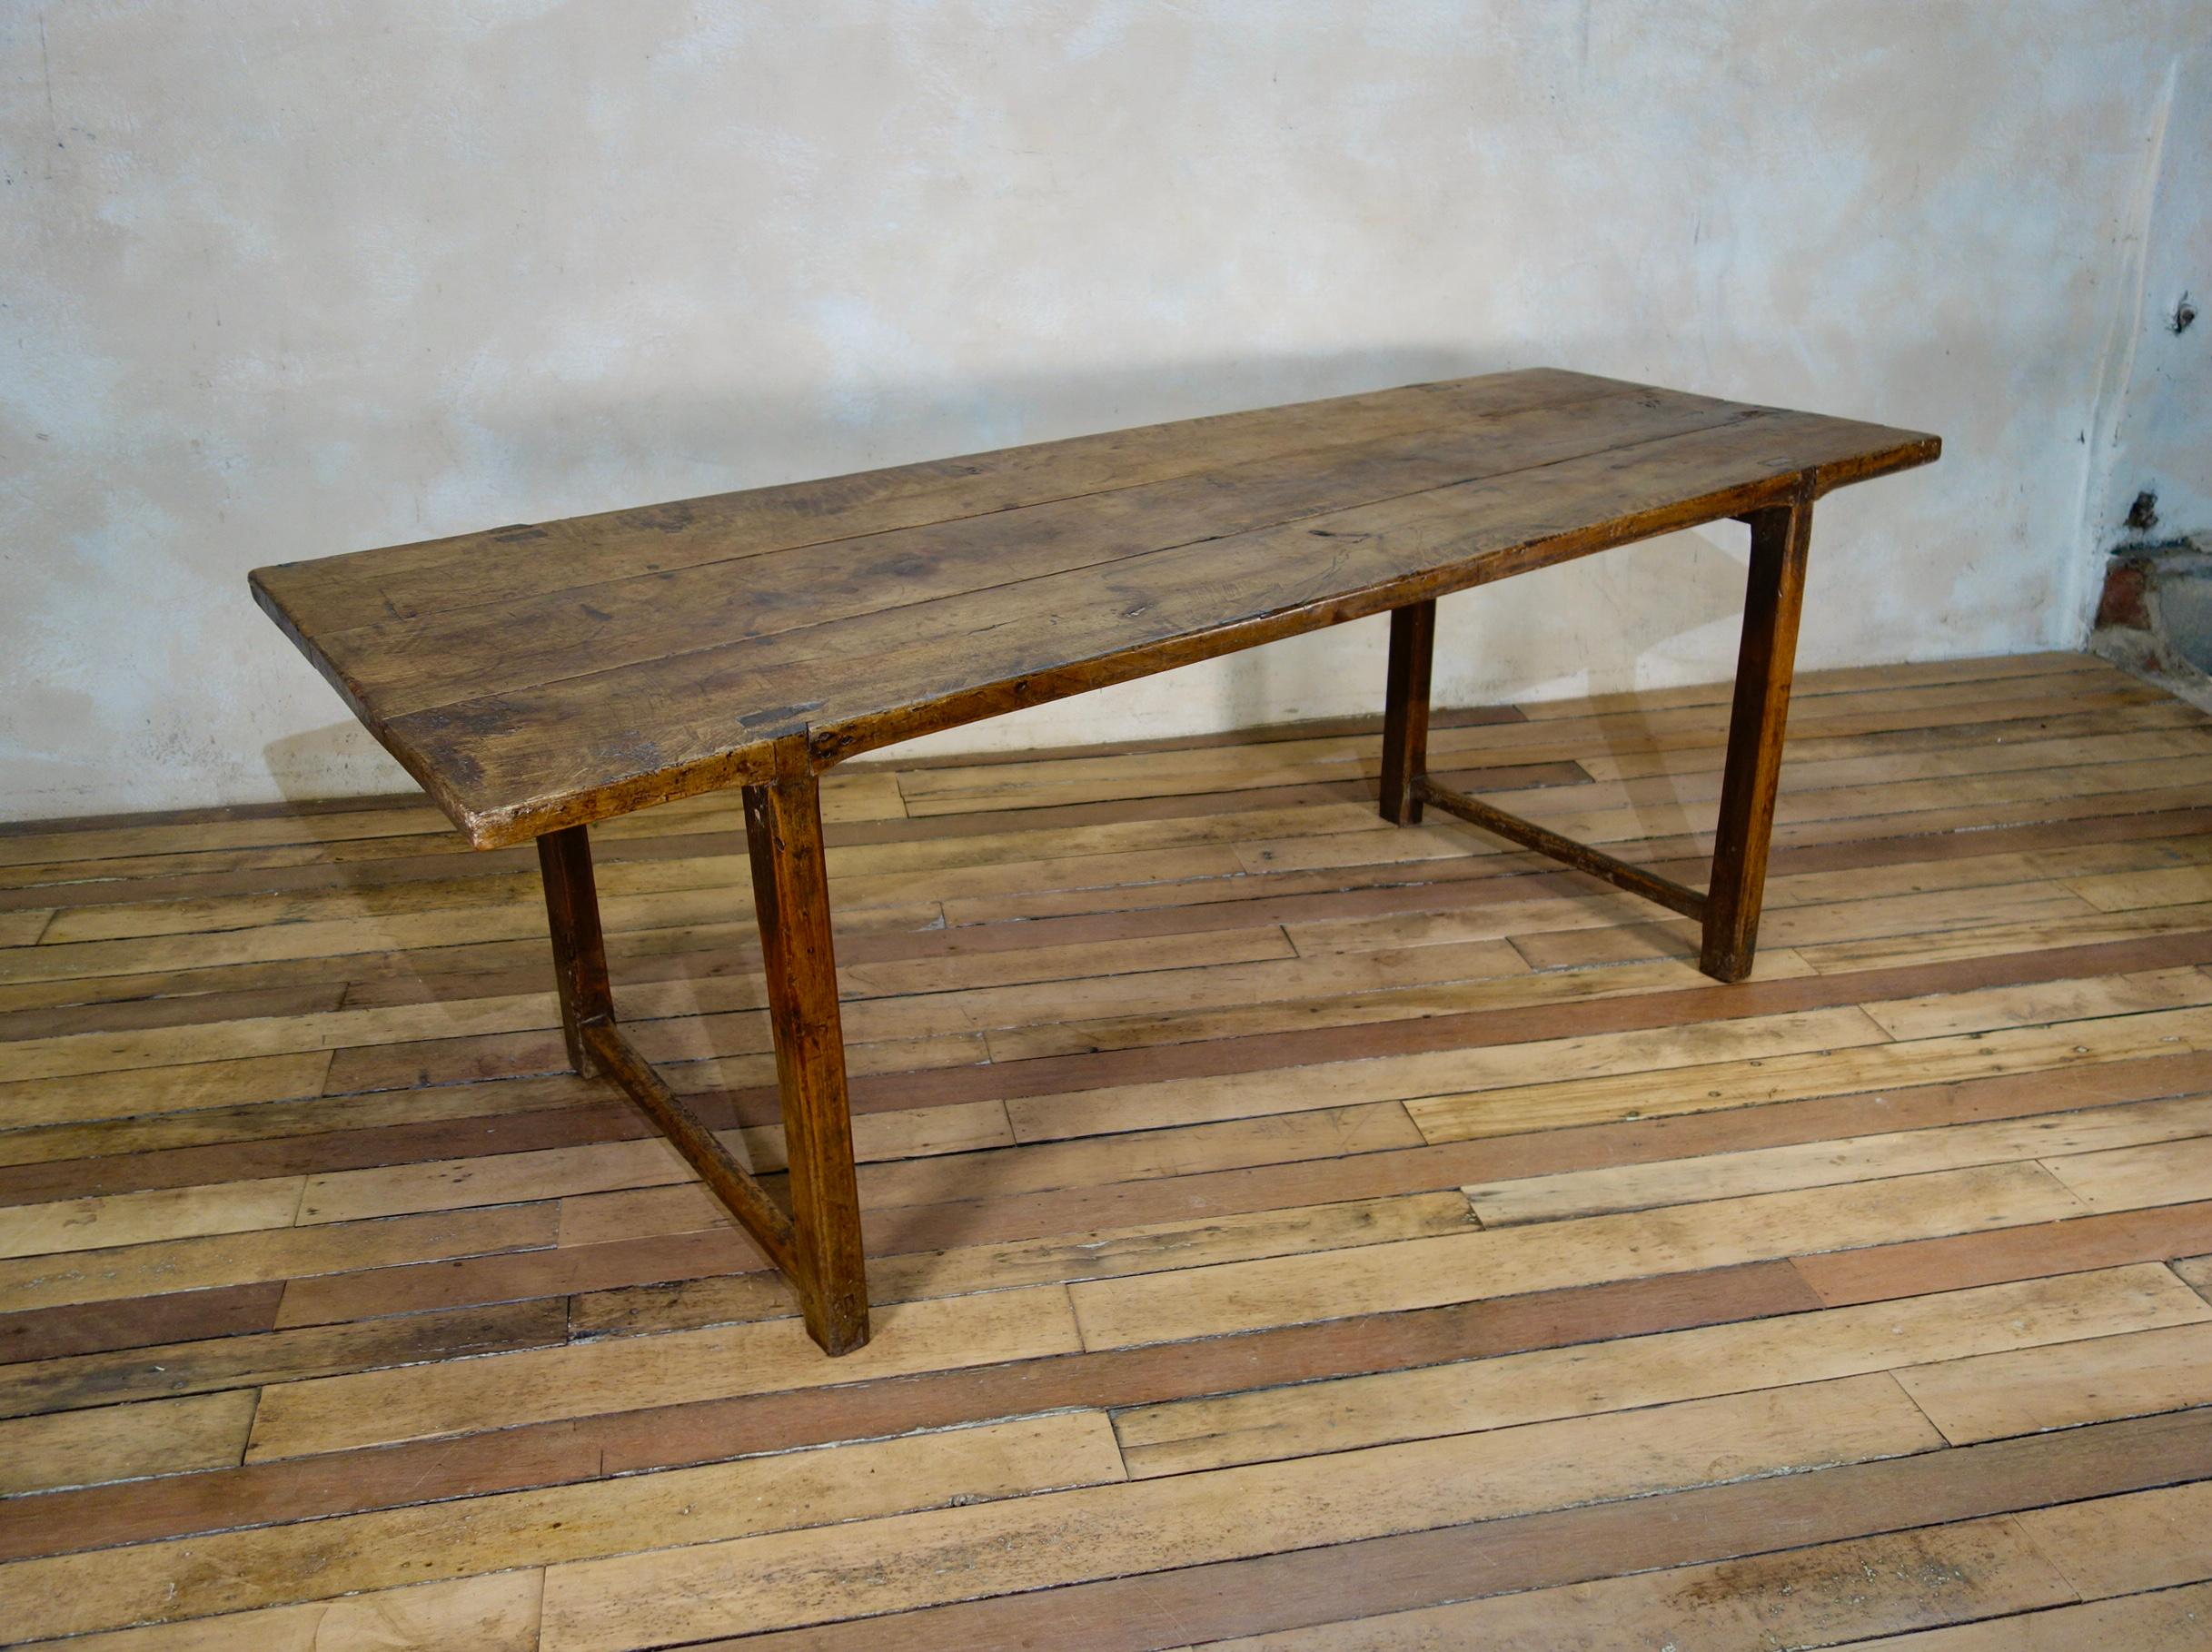 An elegant early 18th century French provincial cherry wood farmhouse table. Demonstrating a simplistic design with charming joints visible through the top of the table. Featuring a thick three plank top raised on chamfered legs with refectory